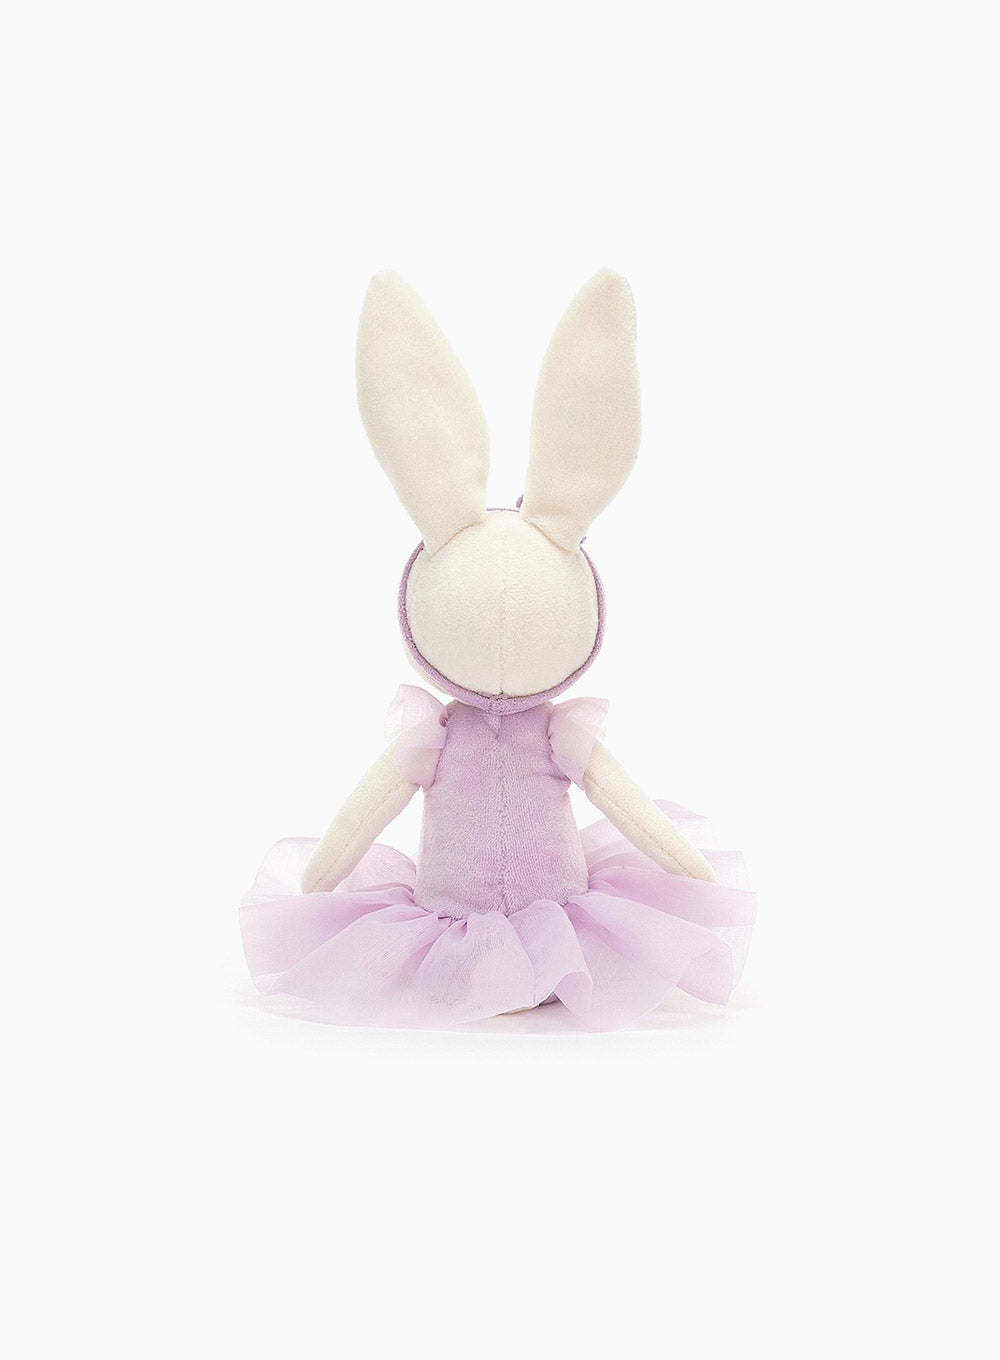 Jellycat Pirouette Bunny in Lilac